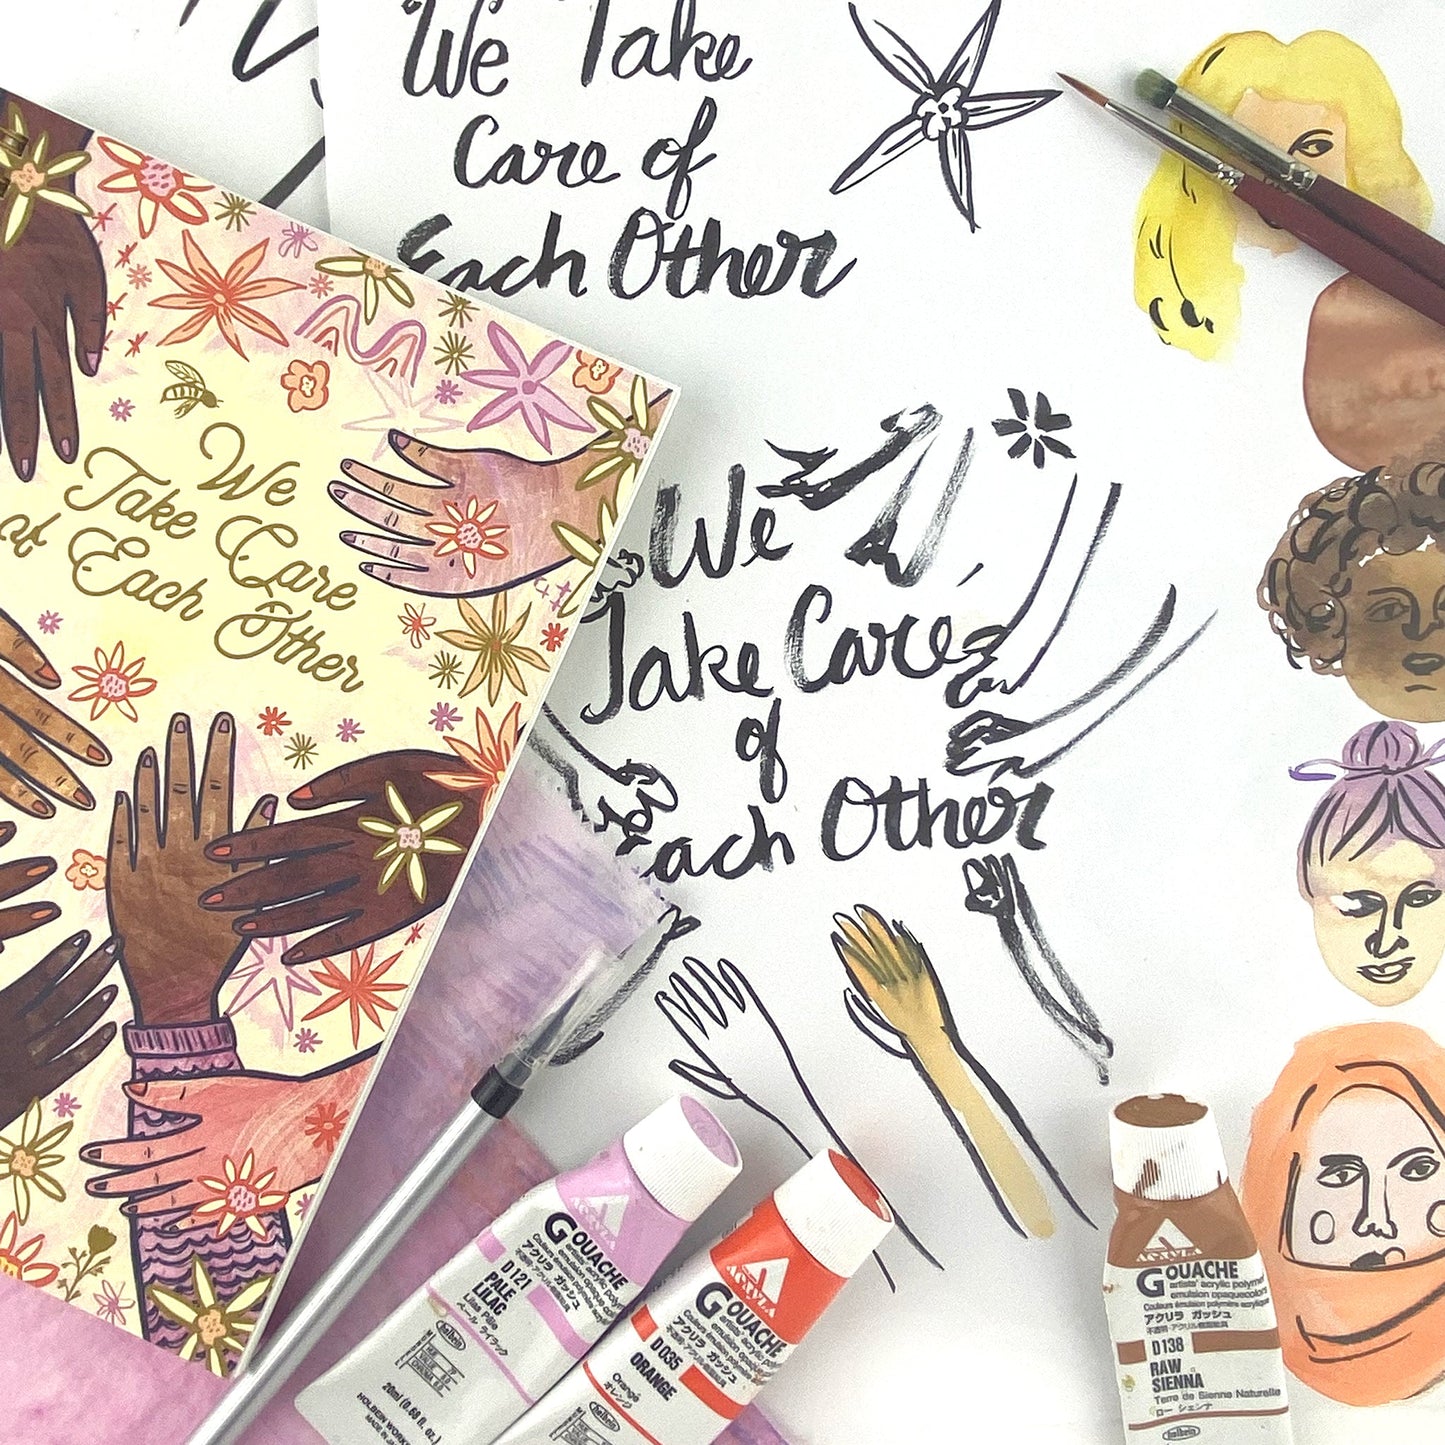 Spiral Bound notebook with hand drawn artwork of multi racial hands and flowers. In the center text says We Take Care of Each Other. White background with black in drawings and 3 tubes of colorful paint, paint brush, and illustrations of women's faces. 